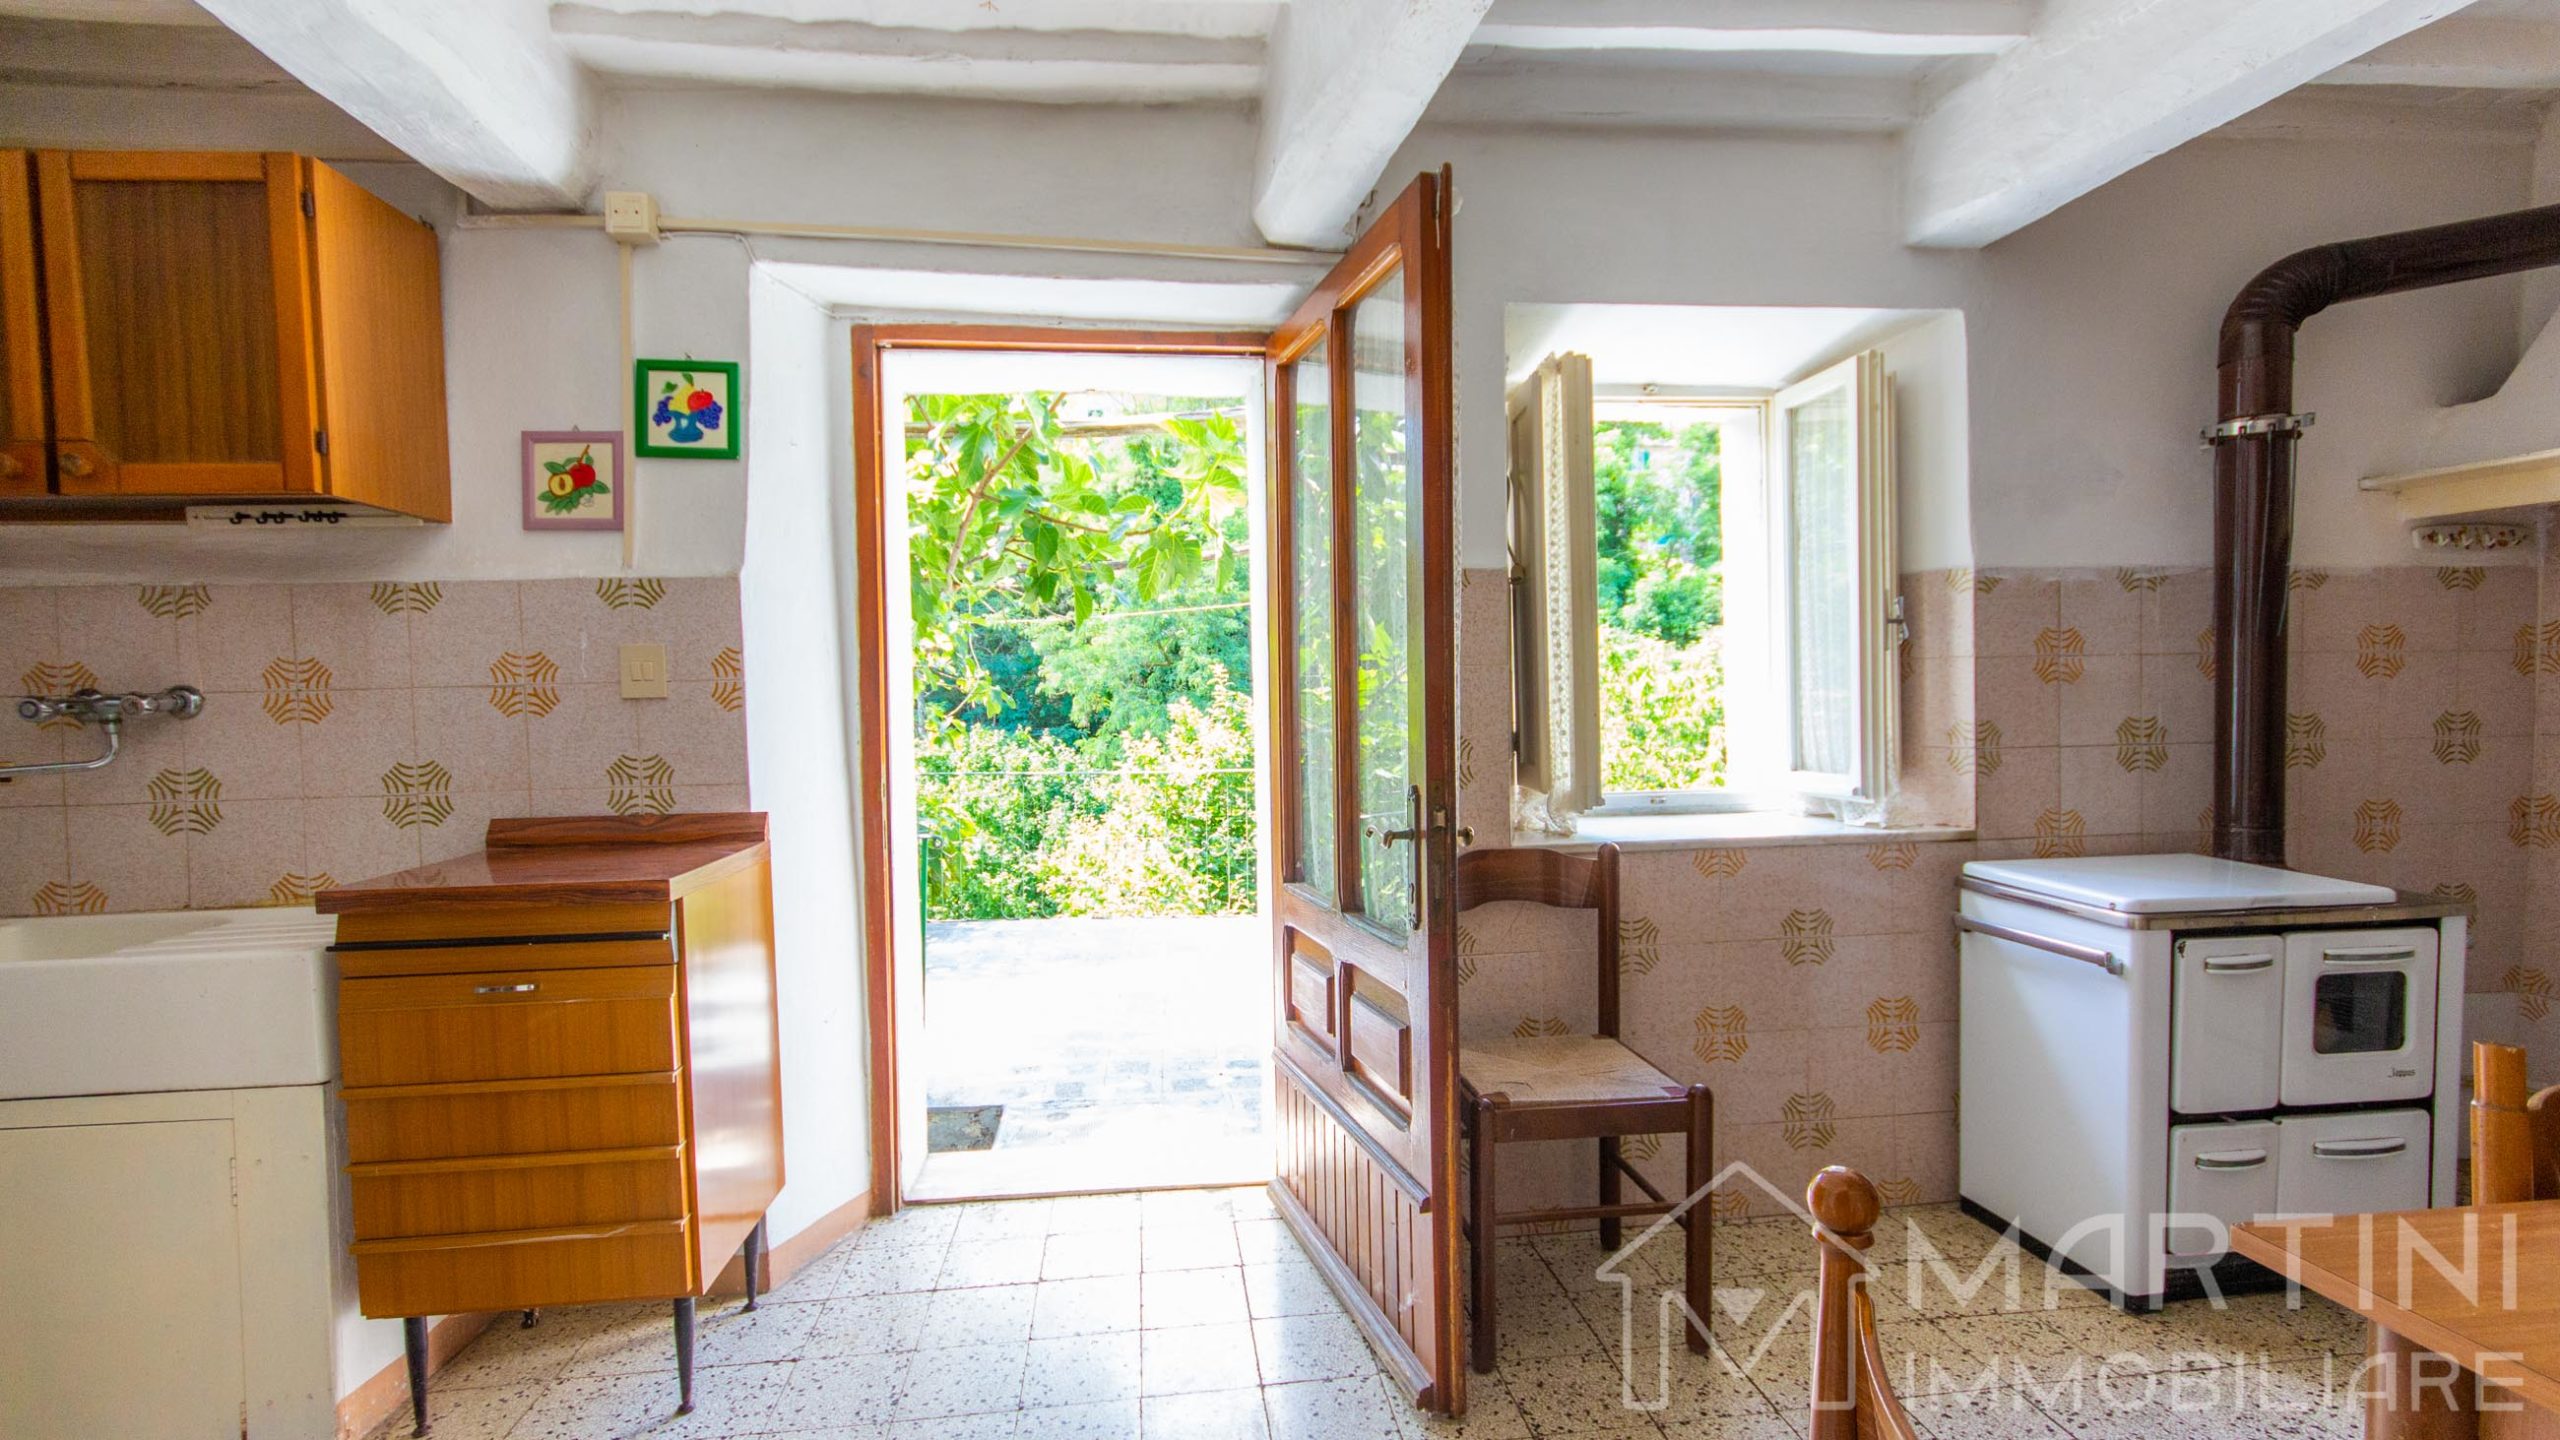 House with Garden for Sale in Montieri – Tuscany